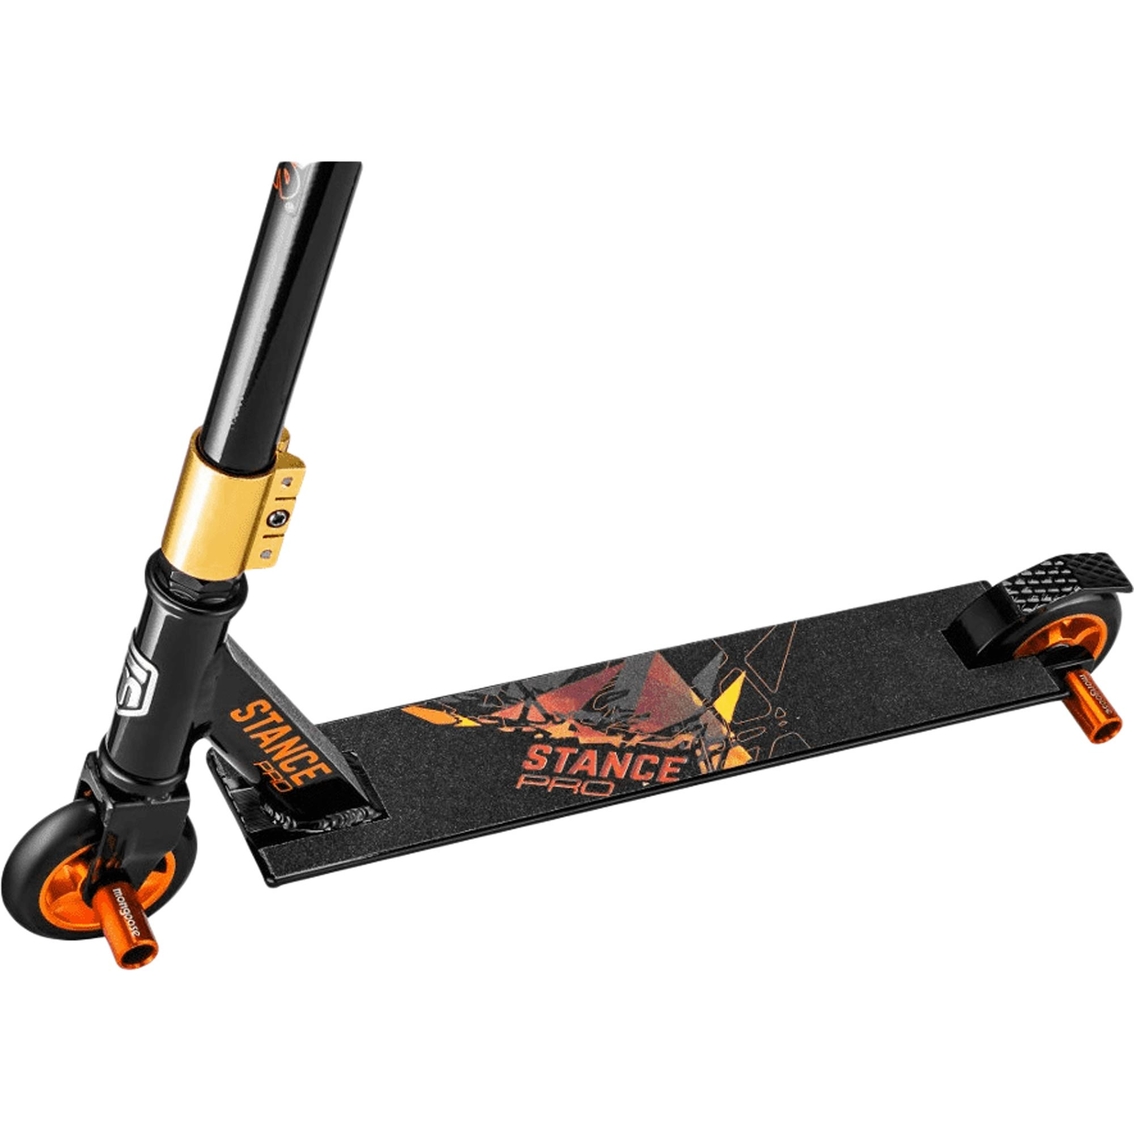 Mongoose Stance Pro Freestyle Scooter - Image 4 of 6